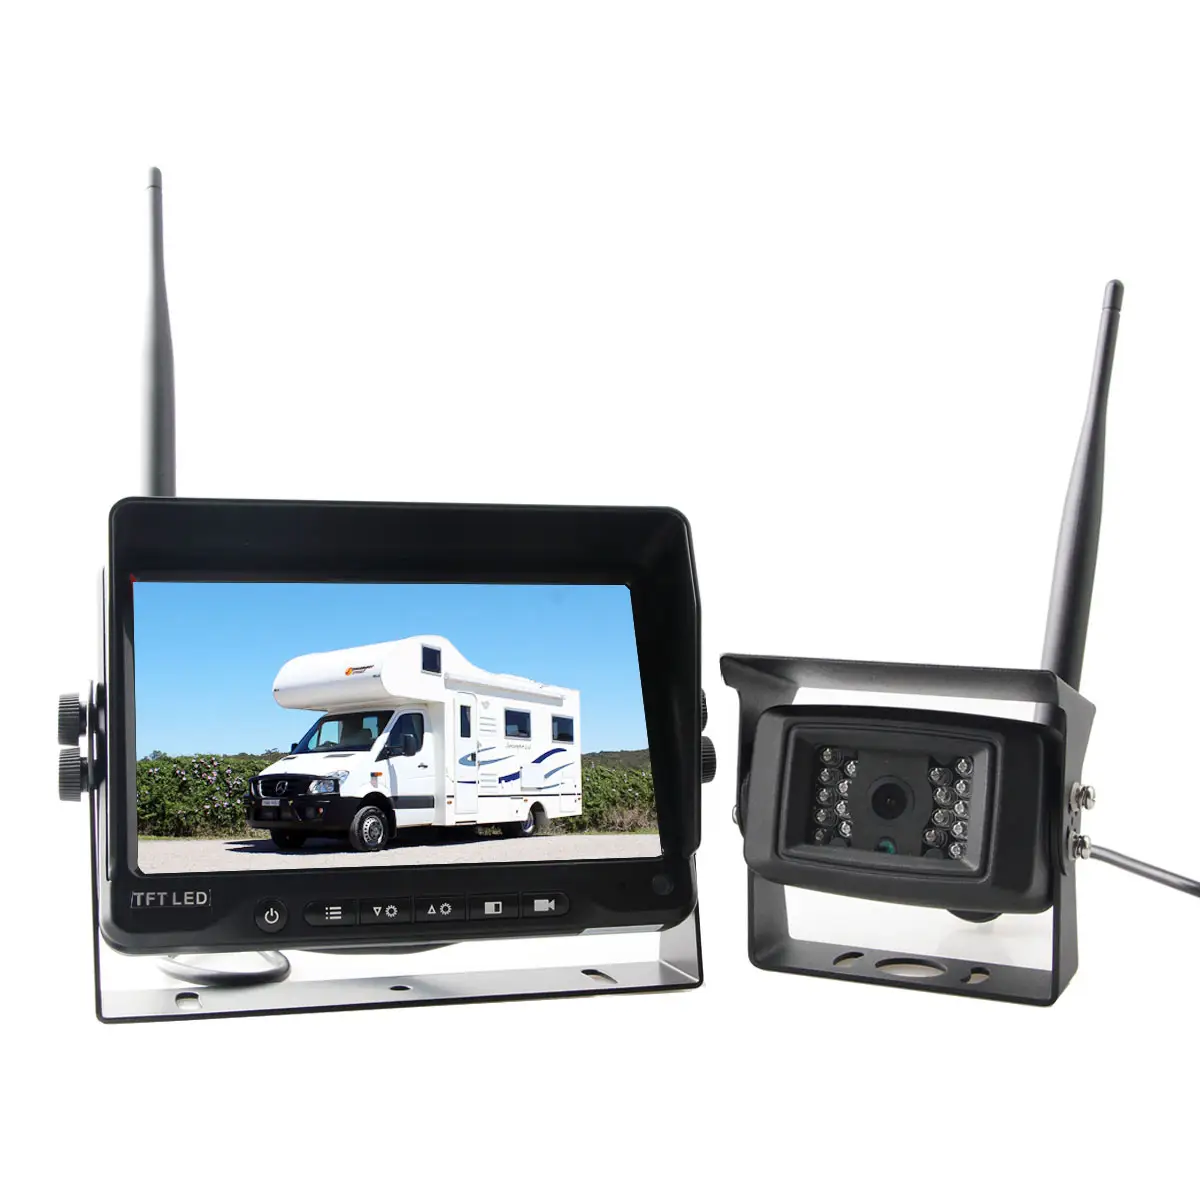 Wireless Camera Monitor Kit System Car Security Rear View 2 4G 7 INCH Screen BUS Truck RV Trailer Wireless Back UP Camera